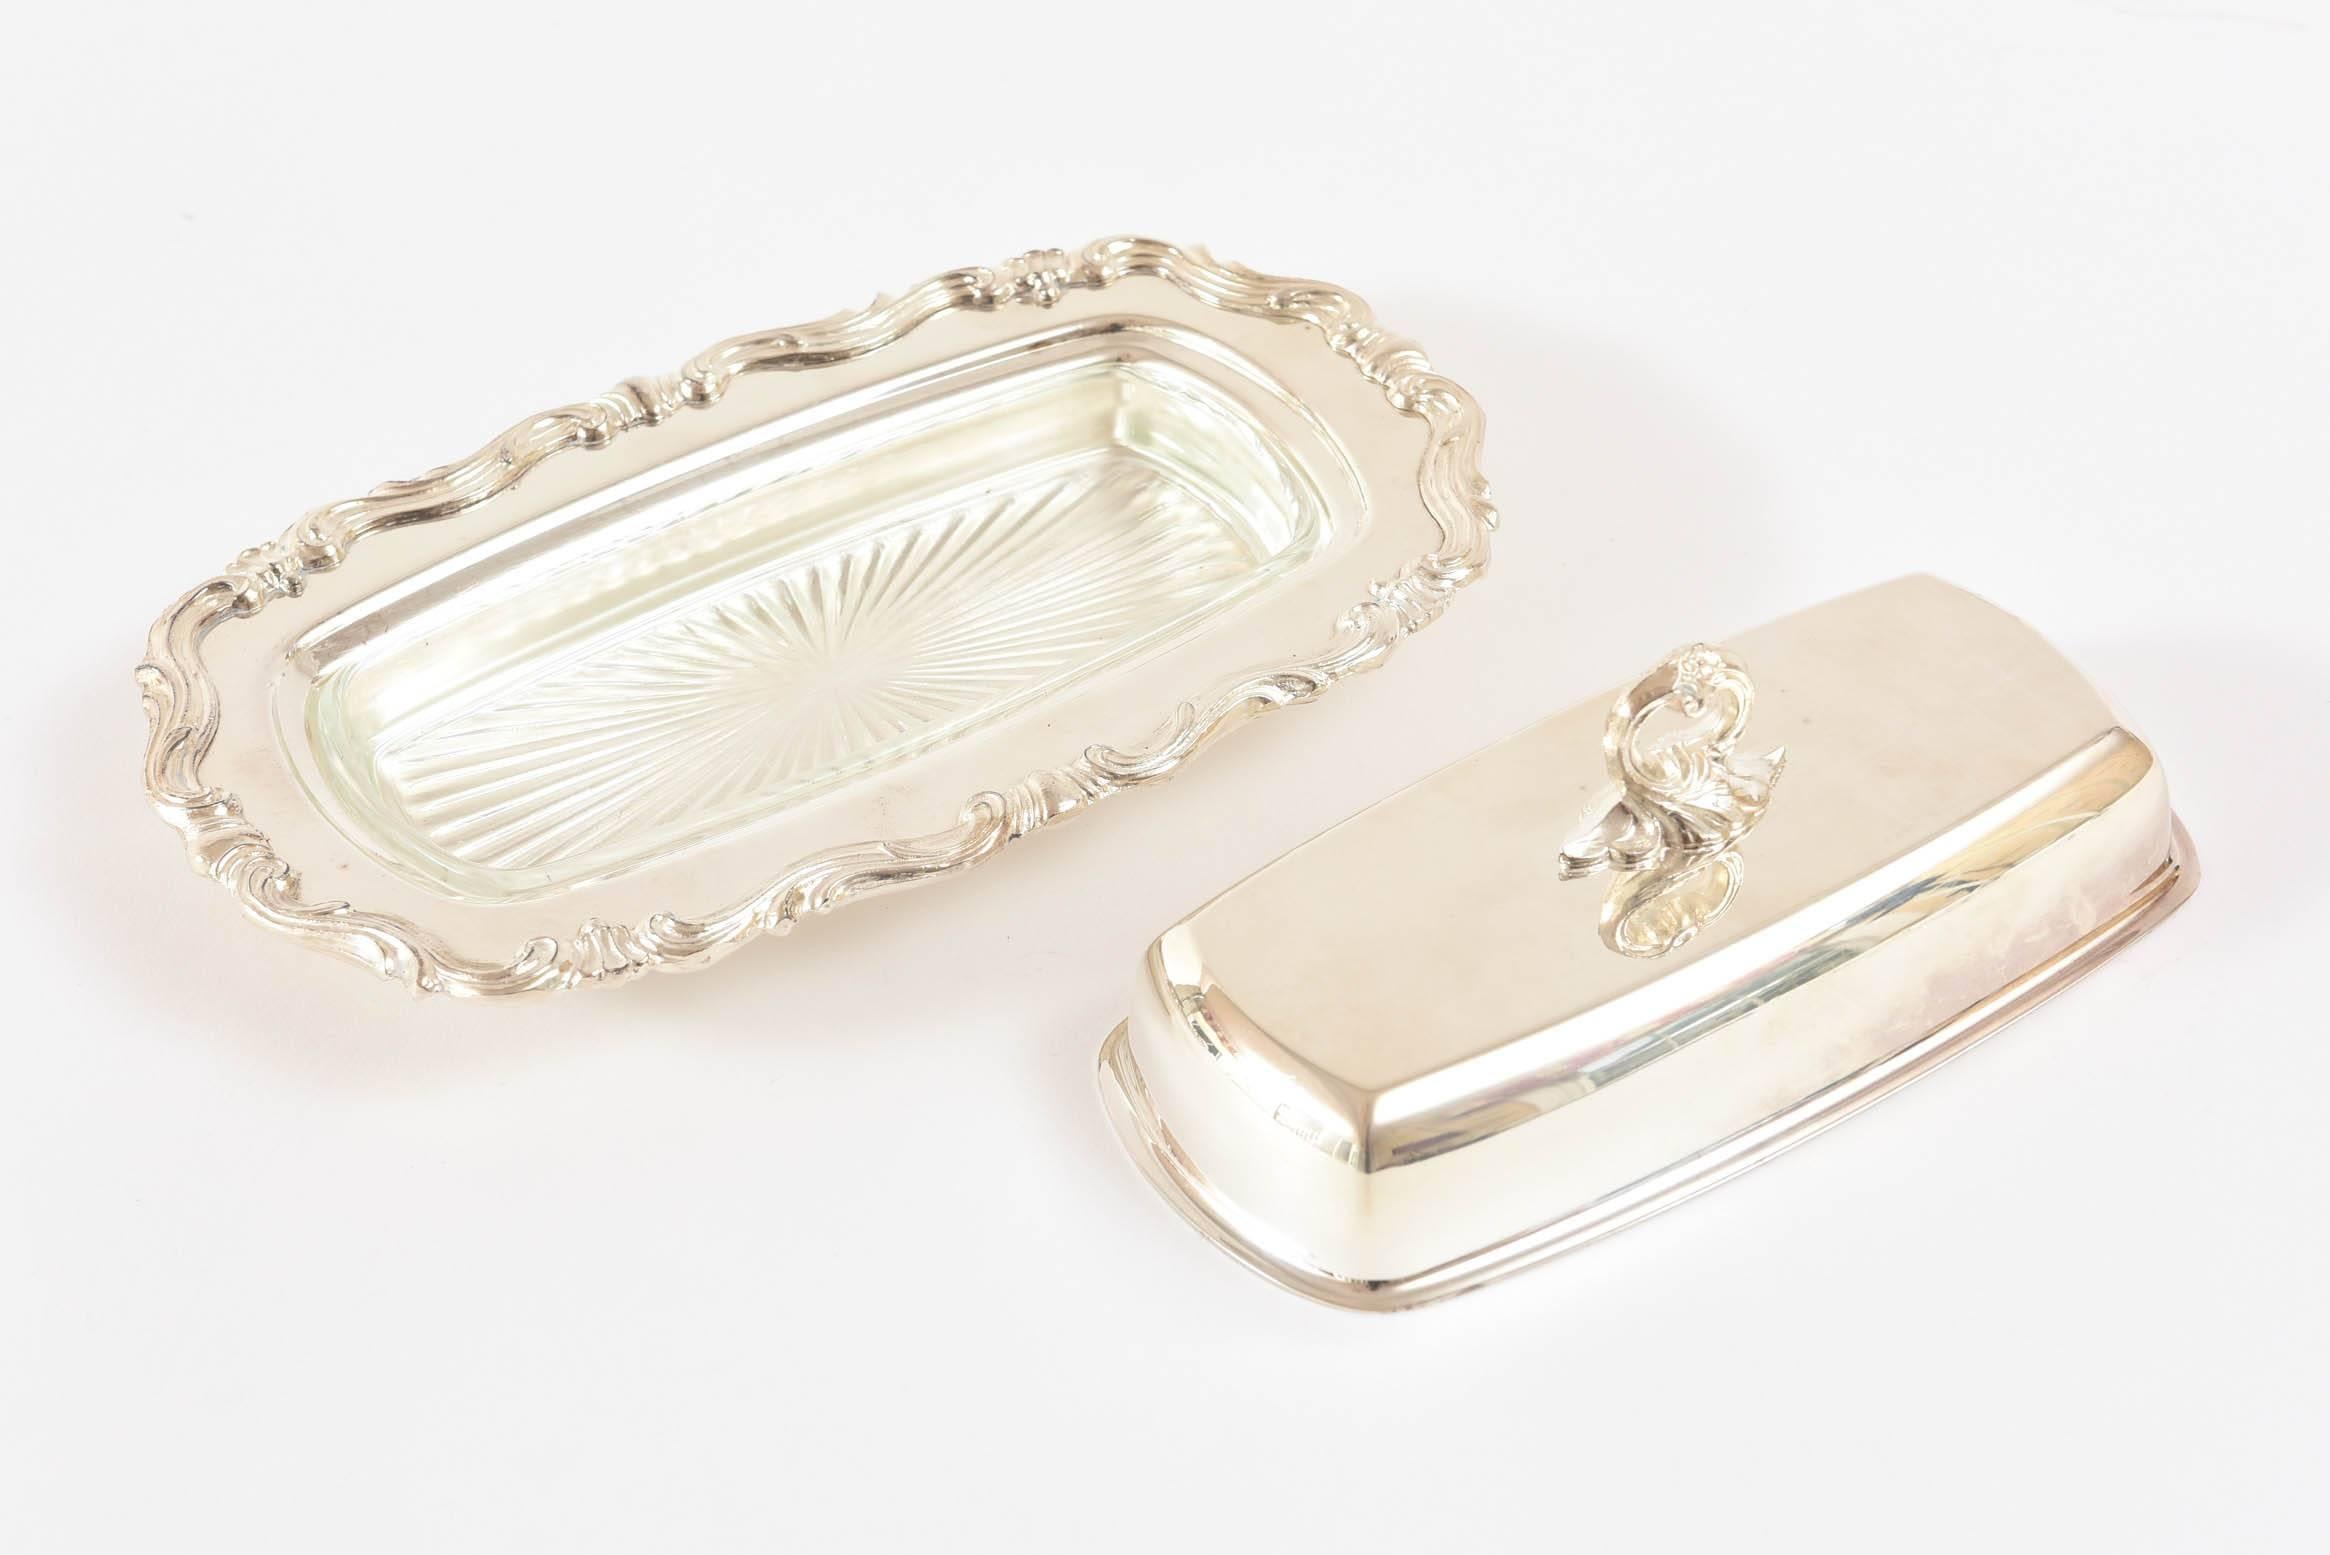 American Charming Silver Plated Butter Dish, Vintage